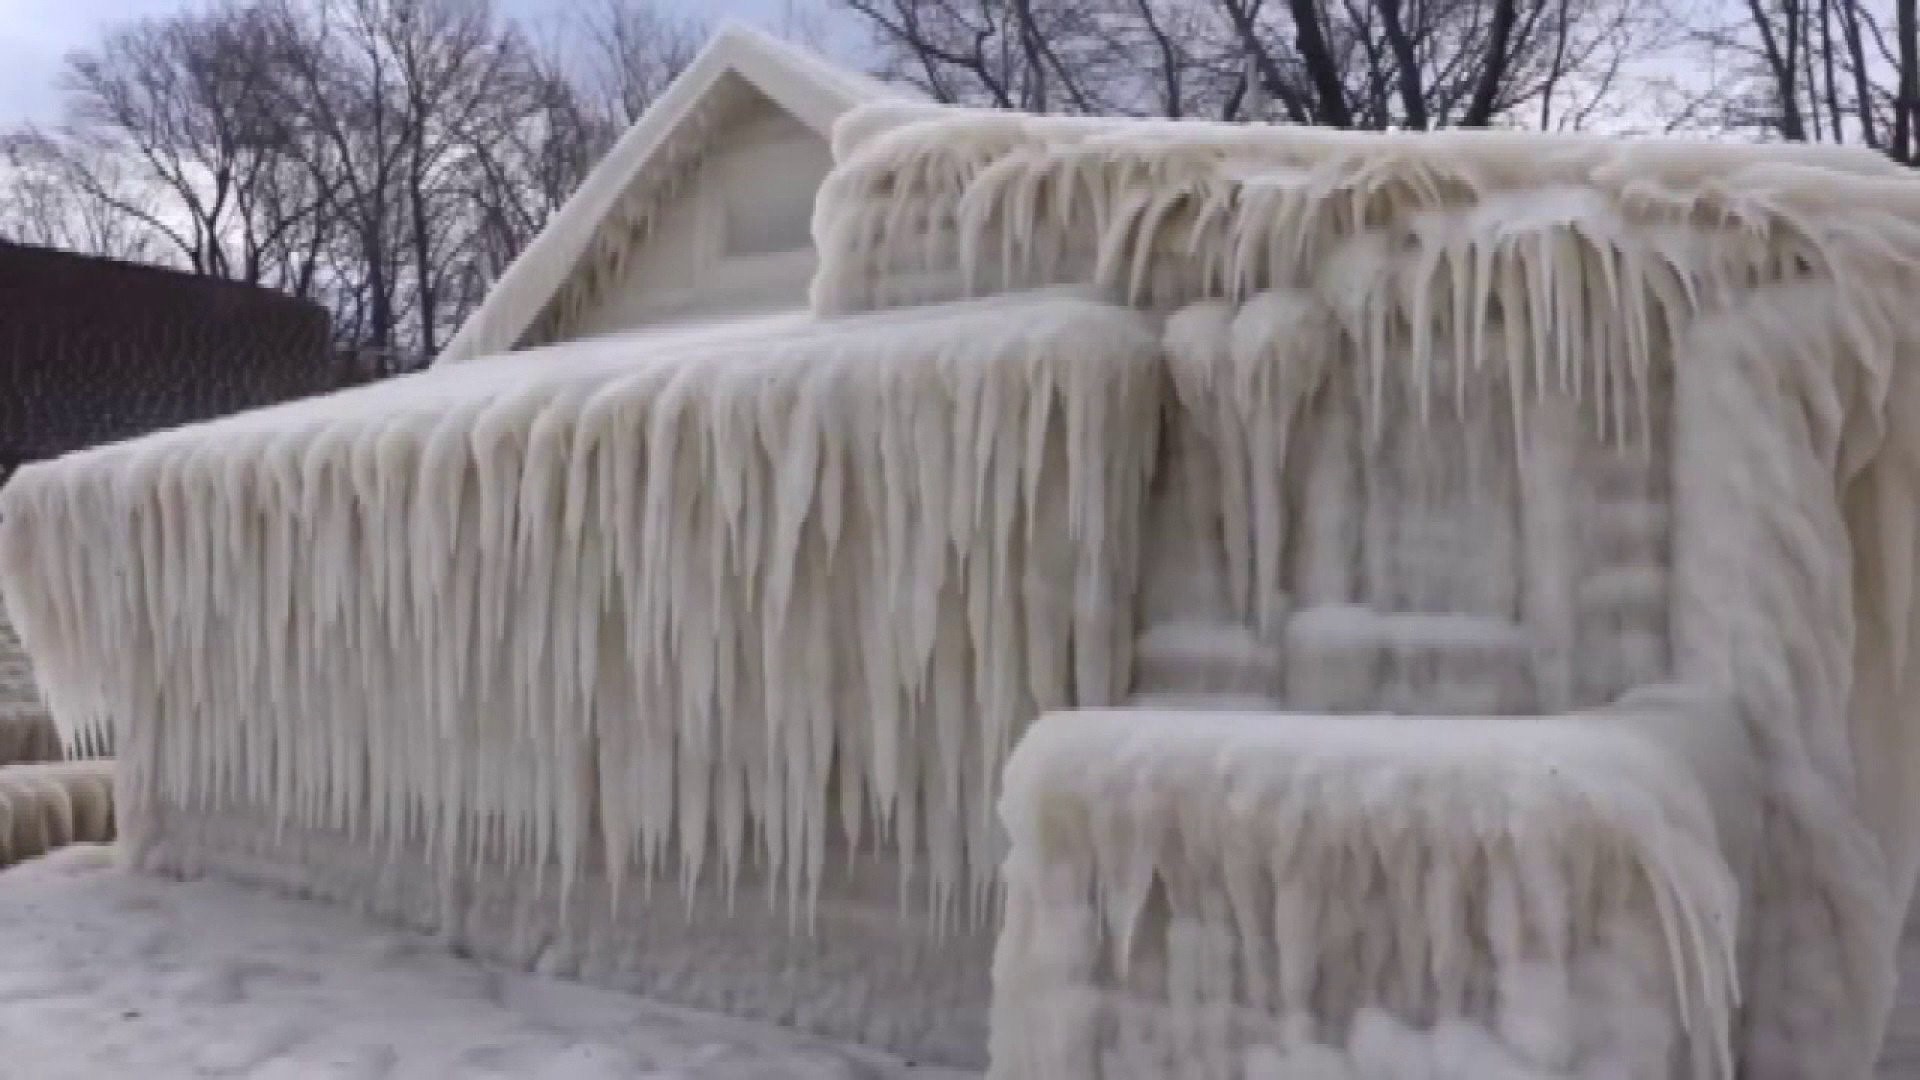 Lakefront house in Webster, New York covered in ice